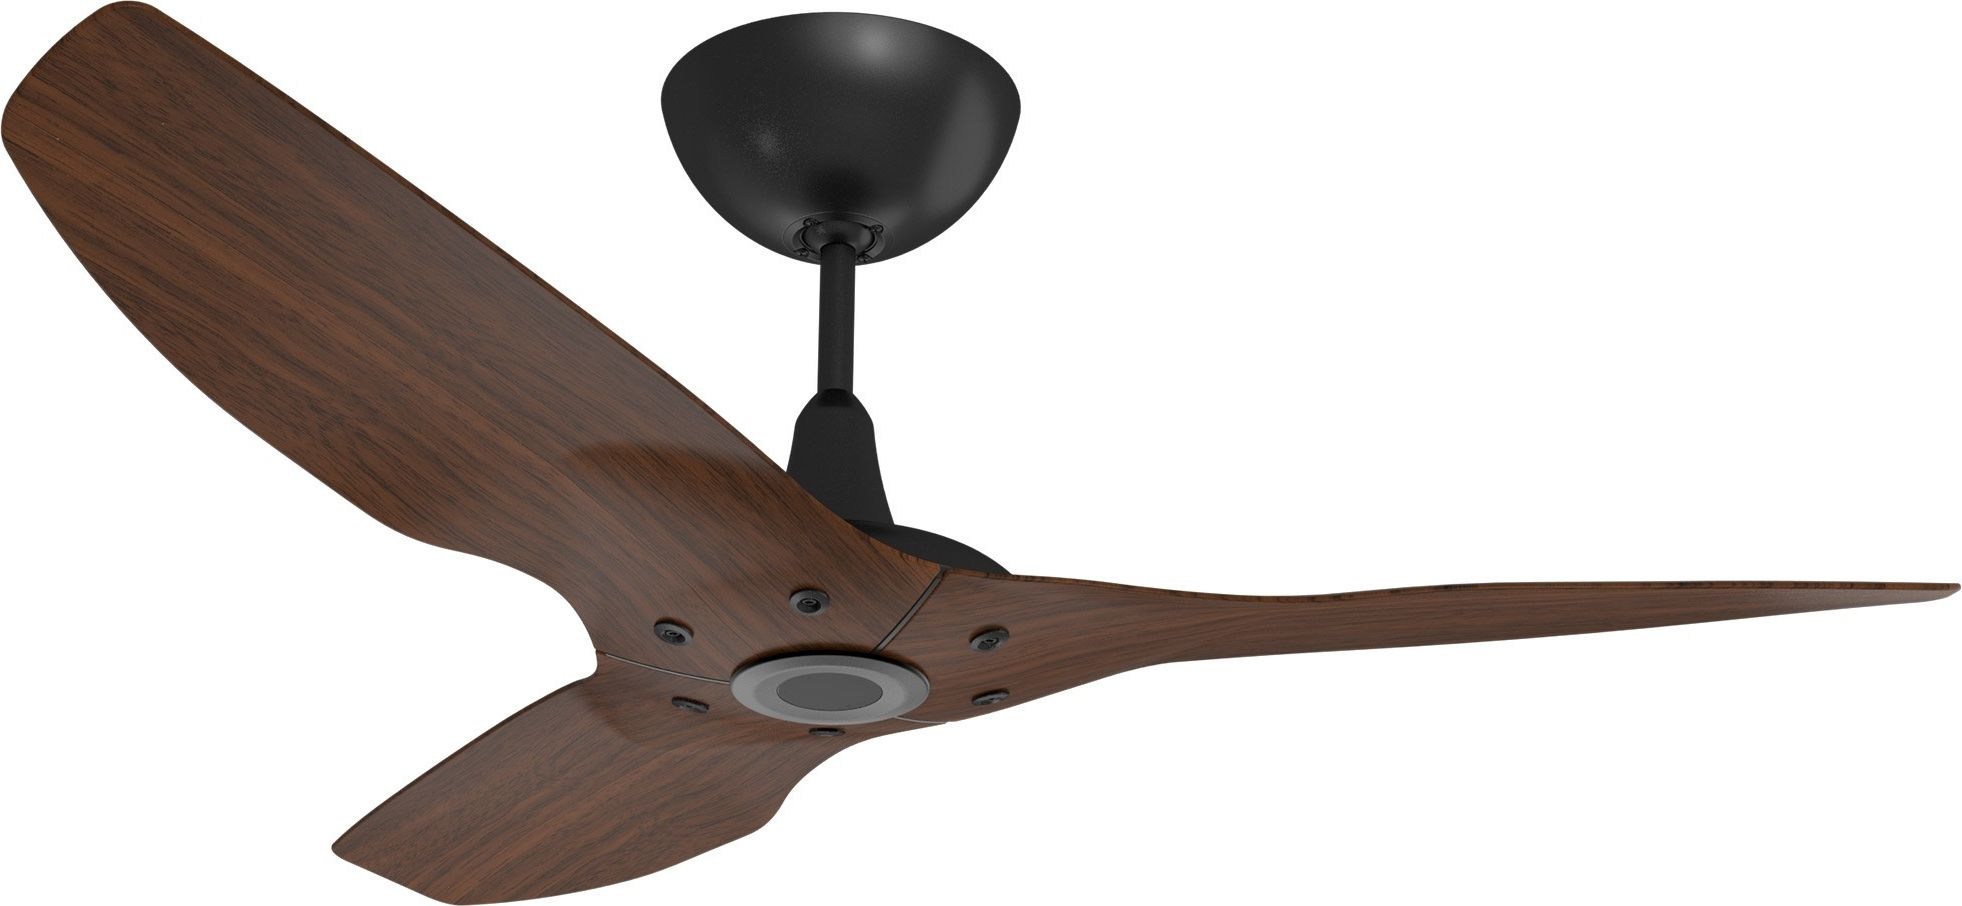 Outdoor Ceiling Fans With Cord For Latest Haiku Outdoor Ceiling Fan: 52", Cocoa Woodgrain Aluminum, Universal (View 7 of 20)